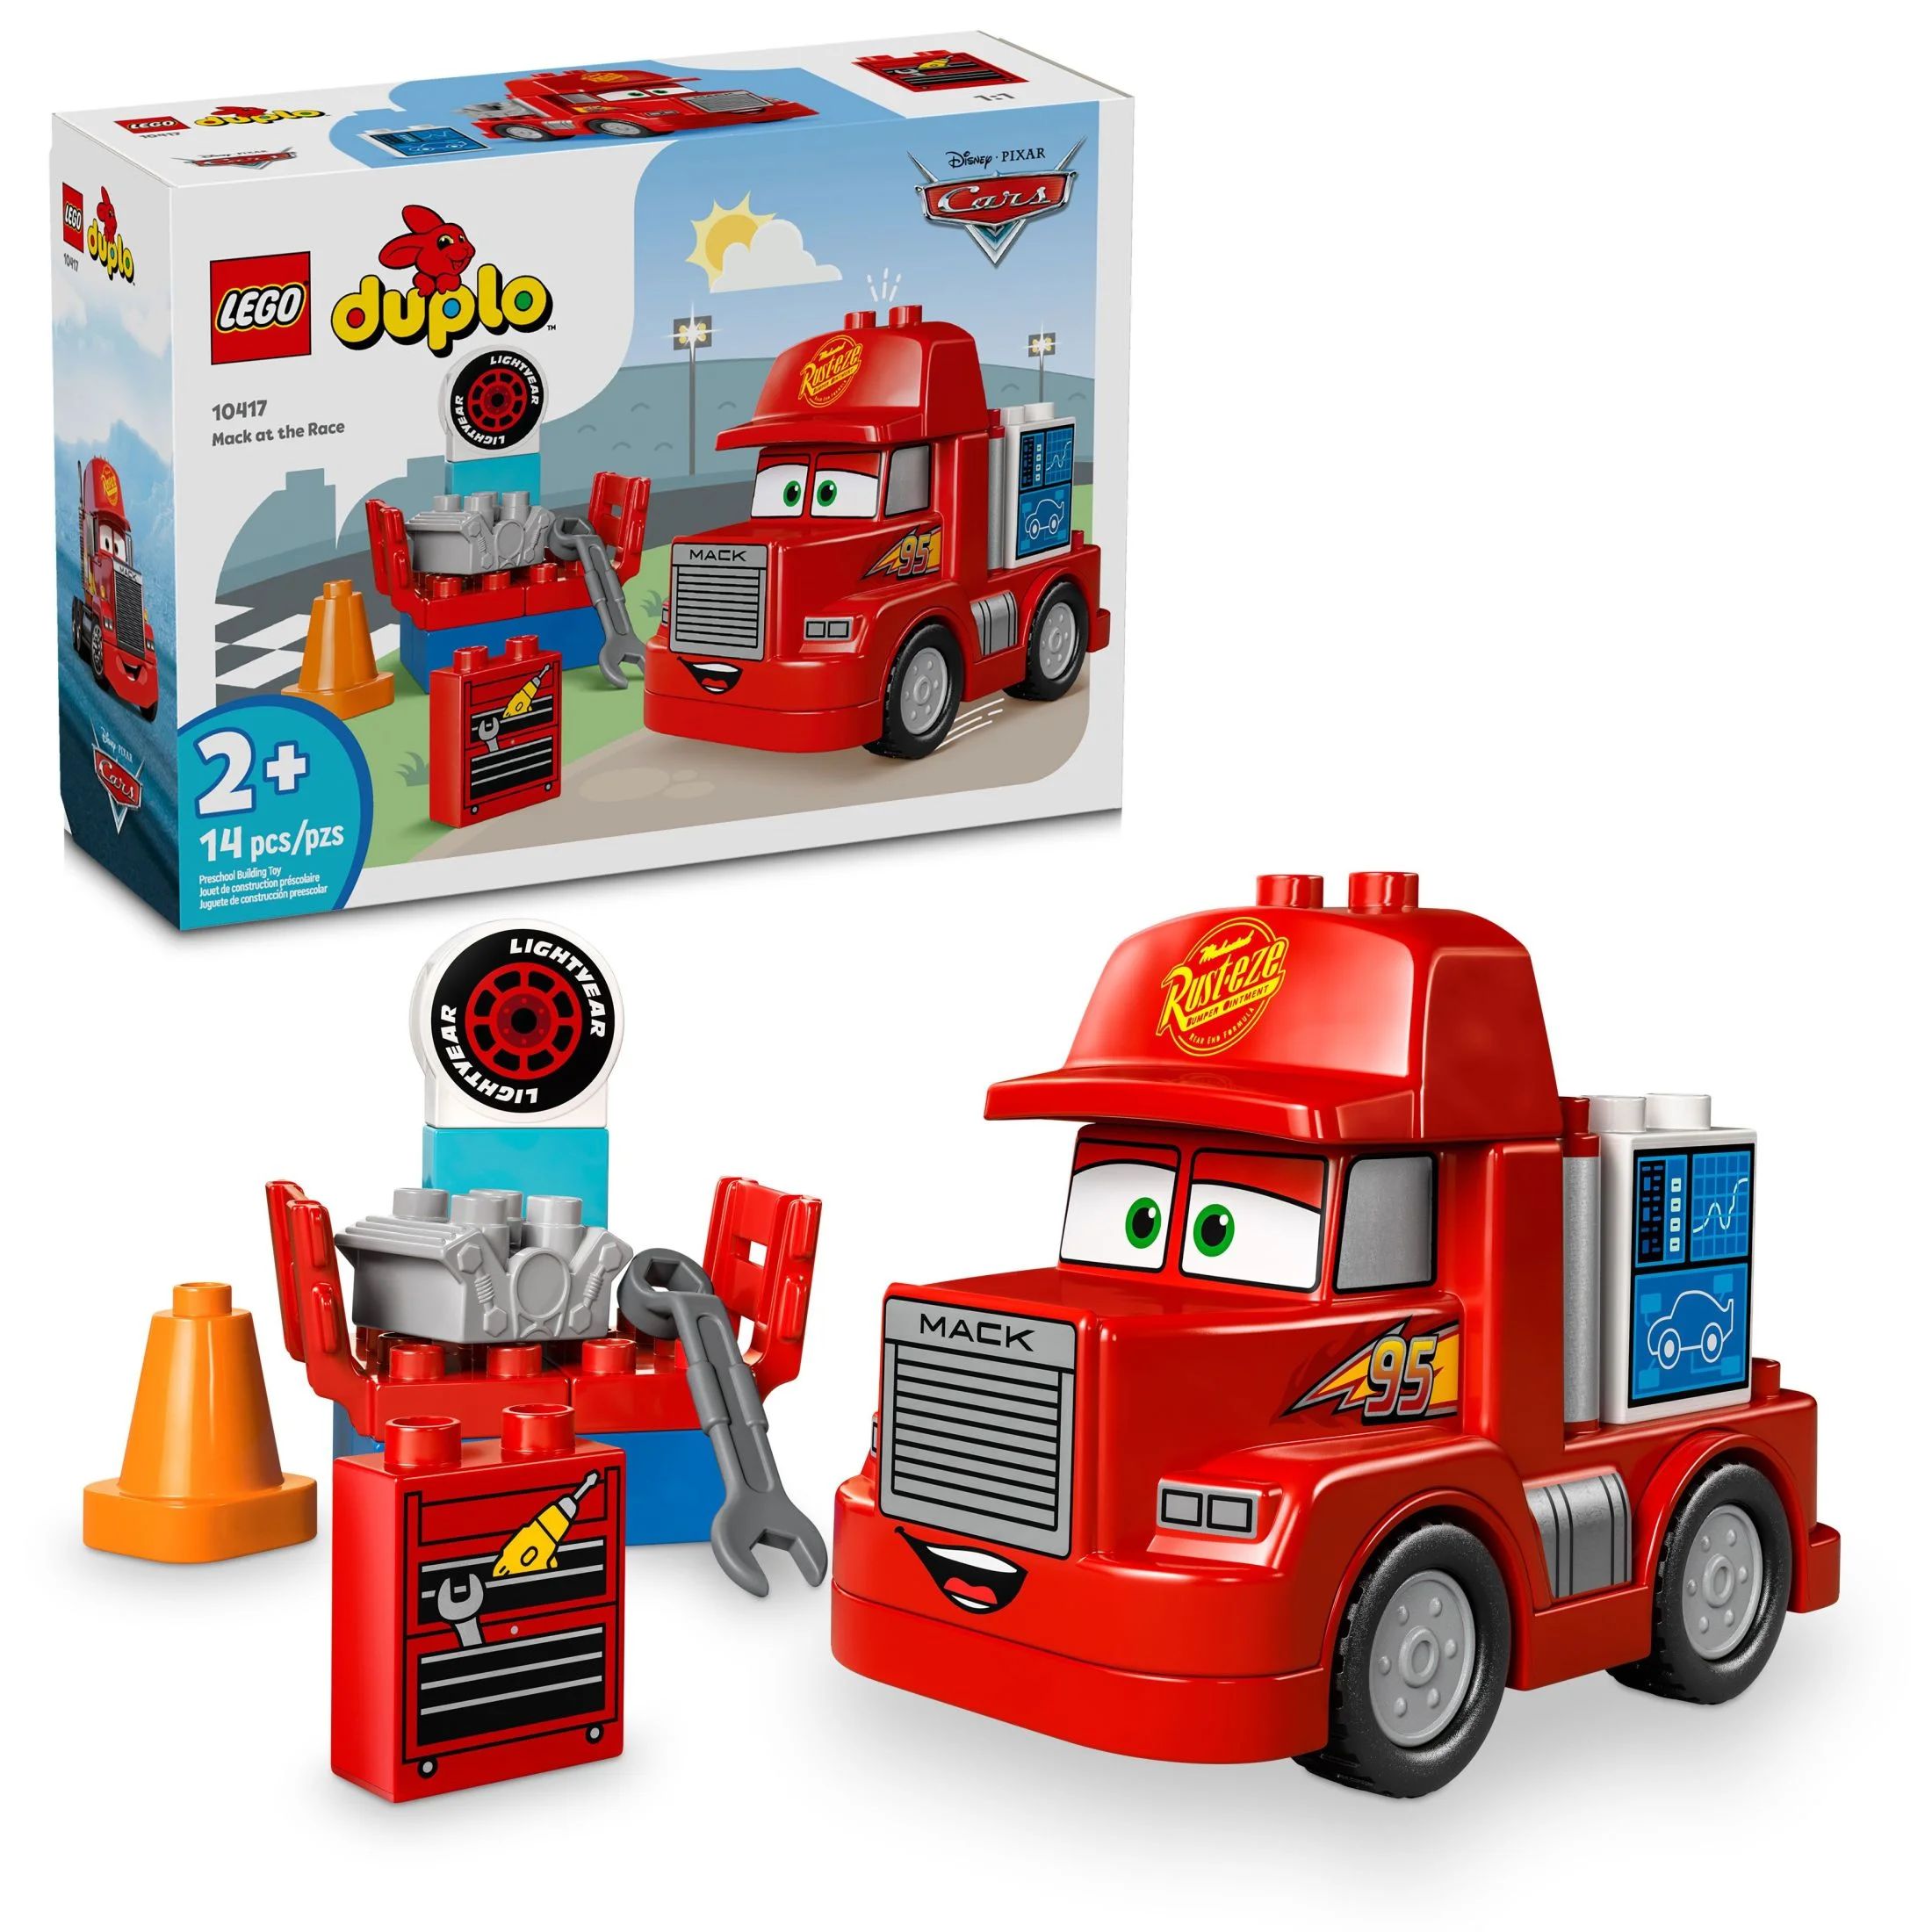 LEGO DUPLO Disney and Pixar’s Cars Mack at the Race Building Set, Toy for Toddler Boys and Girl... | Walmart (US)